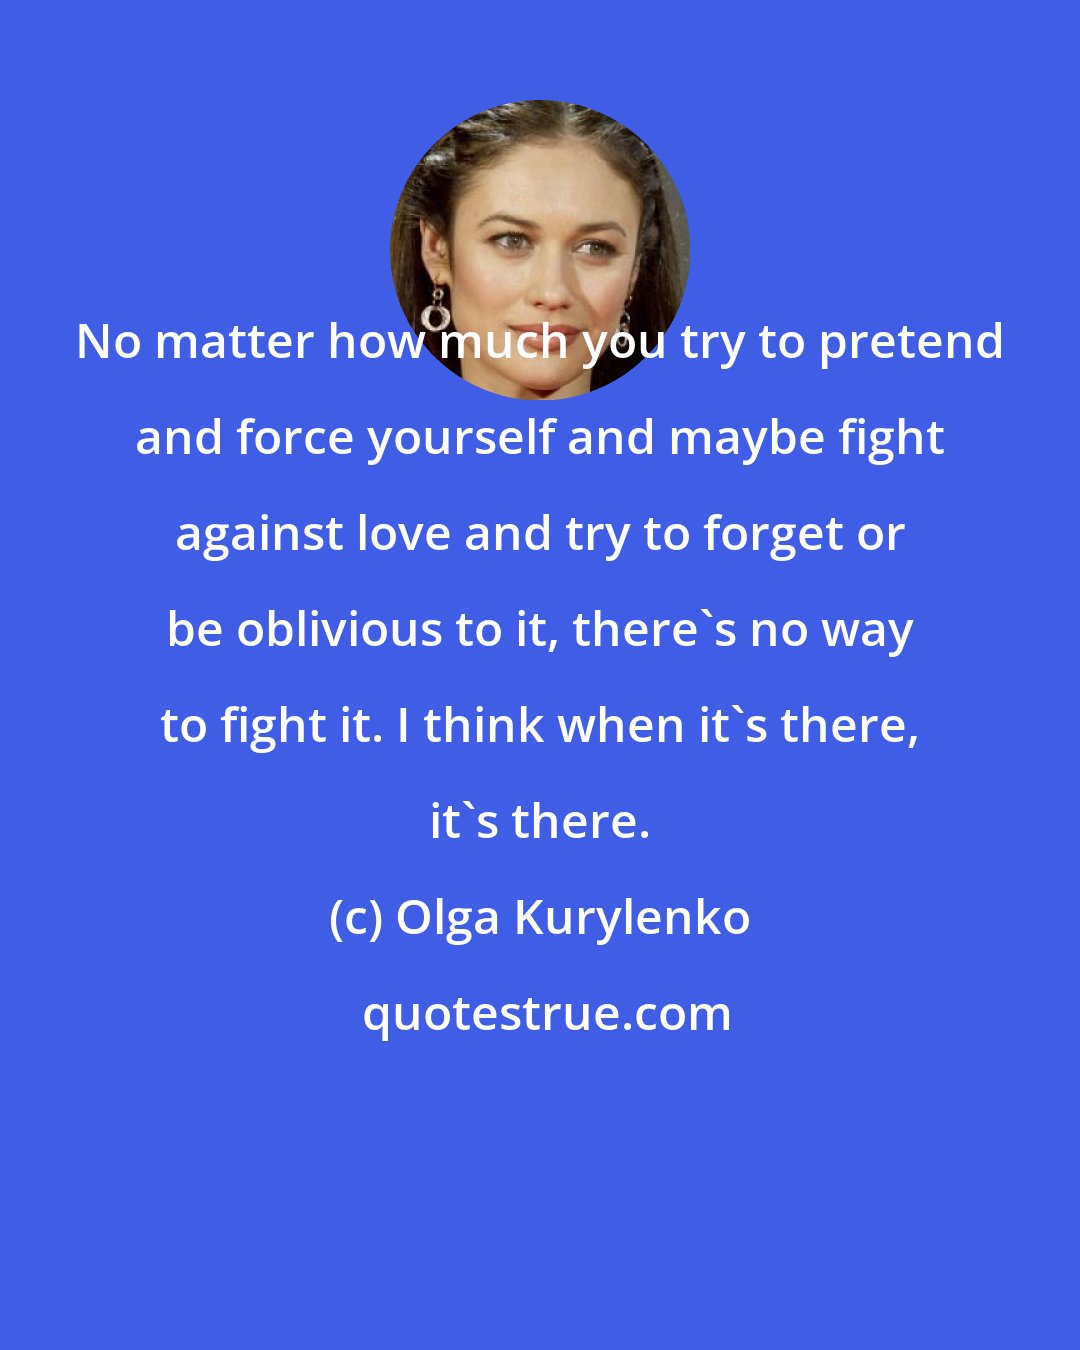 Olga Kurylenko: No matter how much you try to pretend and force yourself and maybe fight against love and try to forget or be oblivious to it, there's no way to fight it. I think when it's there, it's there.